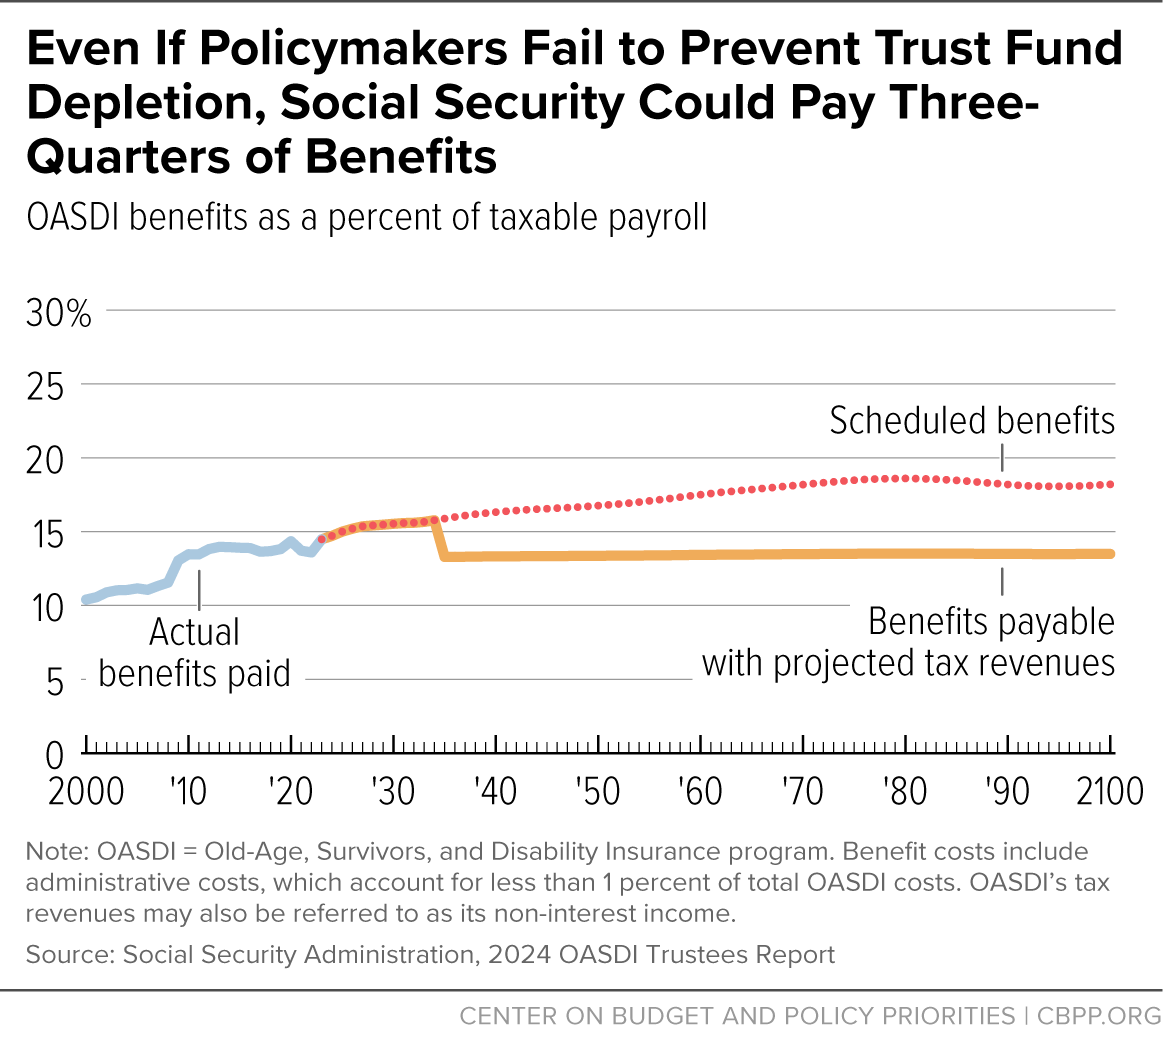 Line chart of OASDI benefits as a precent of taxable payroll